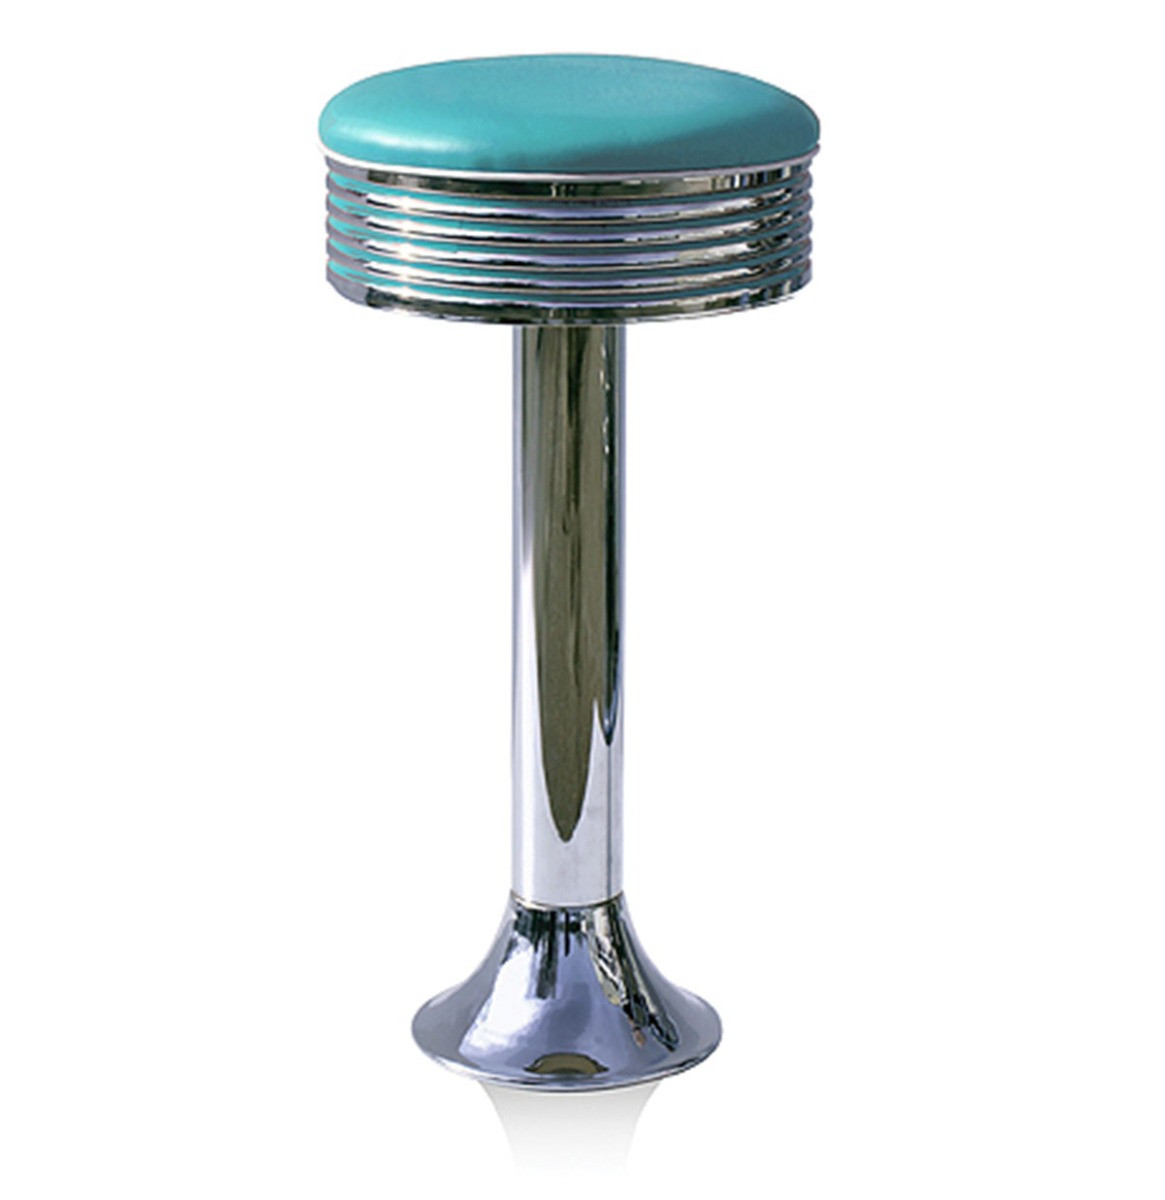 Bel Air Bar Stool BS-27 Turquoise -Hout